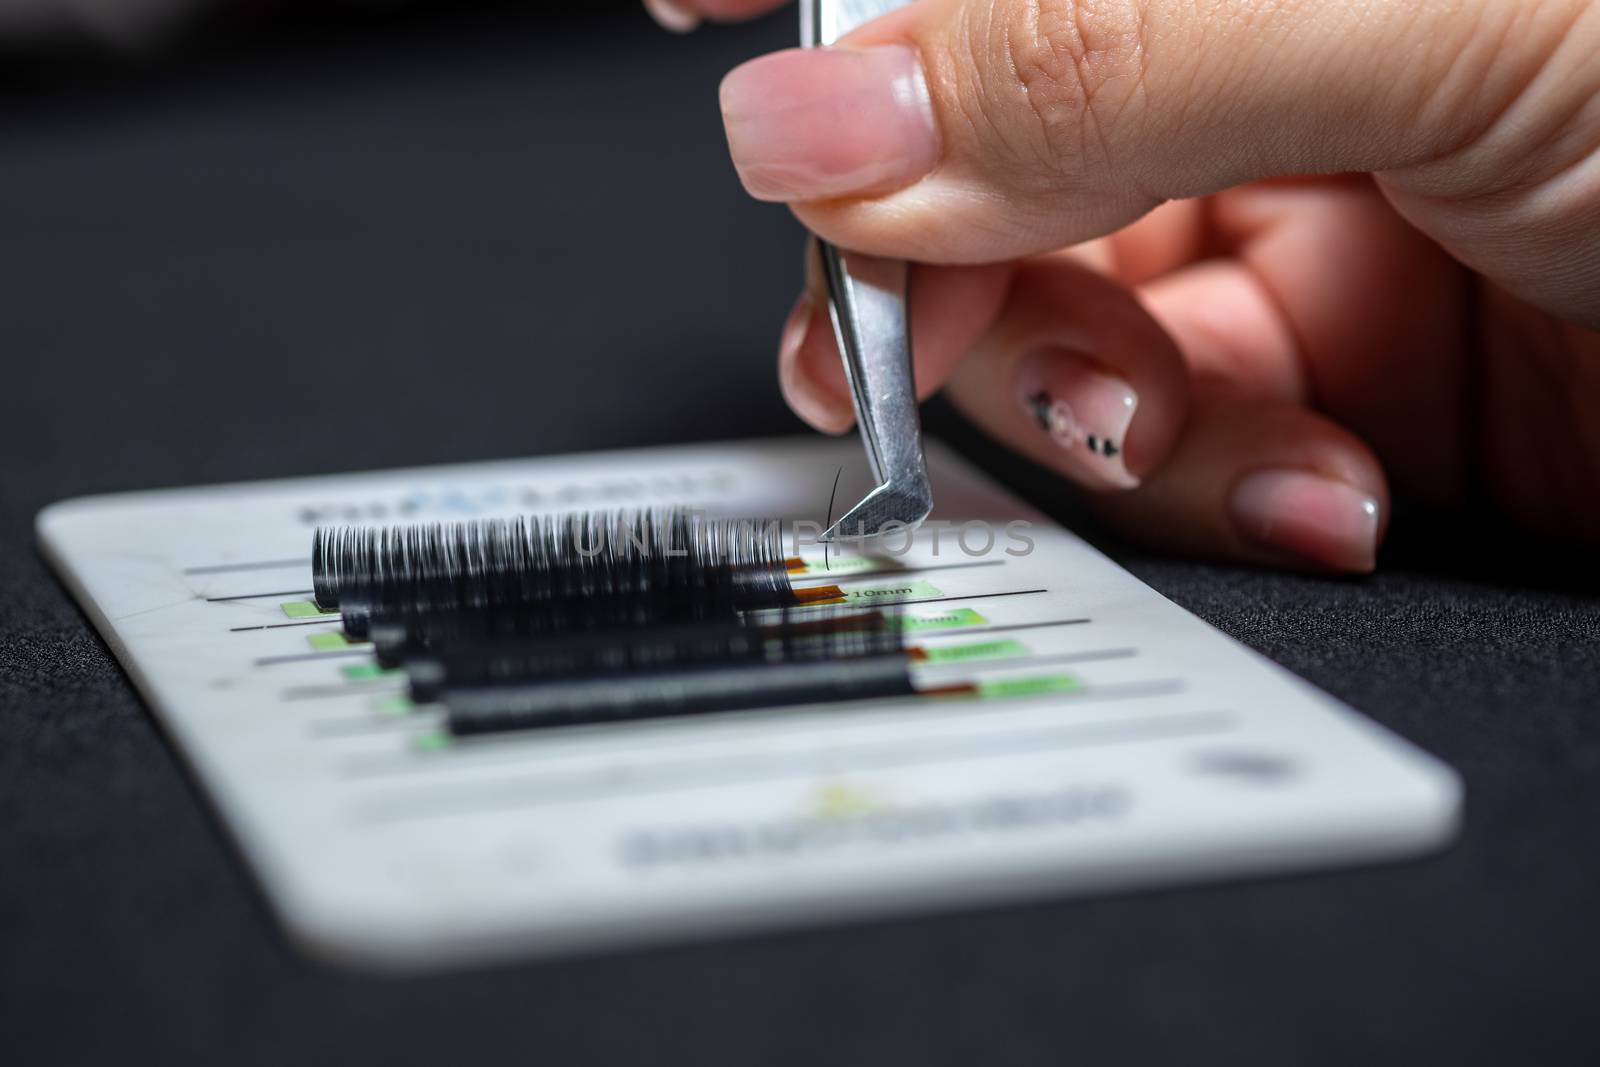 Master hand takes accessories with tweezers tools for eyelash extension.